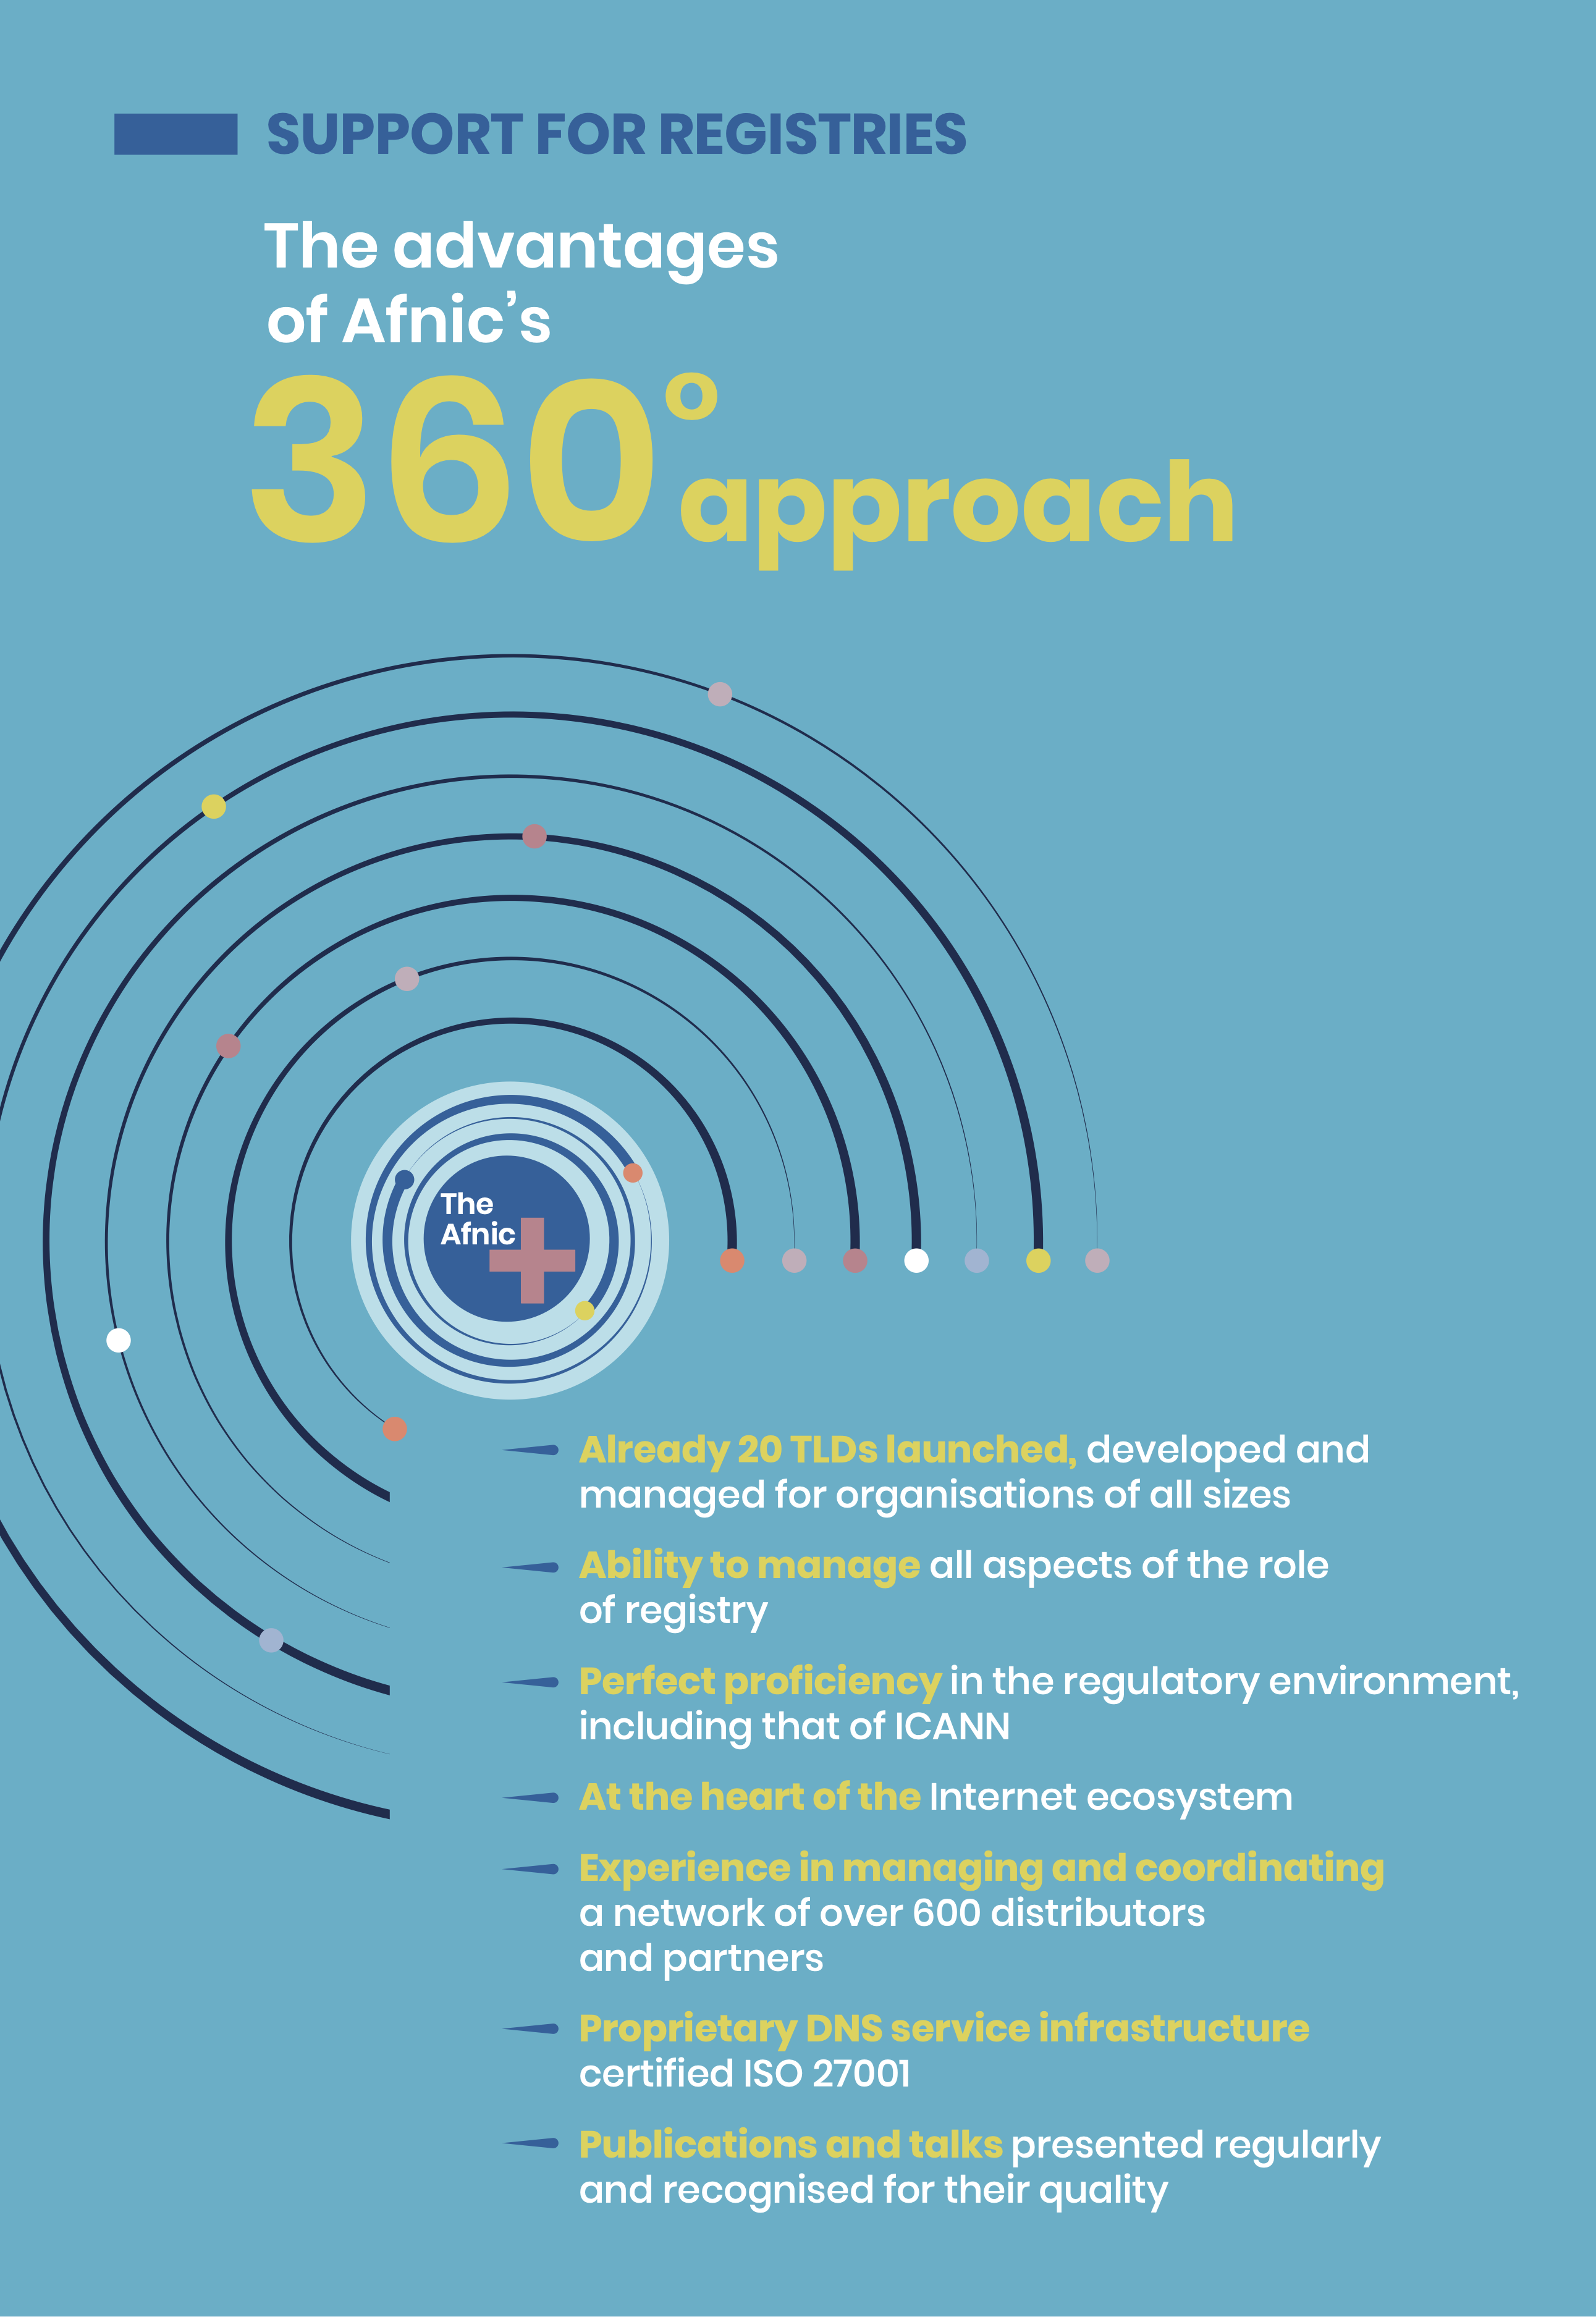 The advantages of Afnic 360° approach